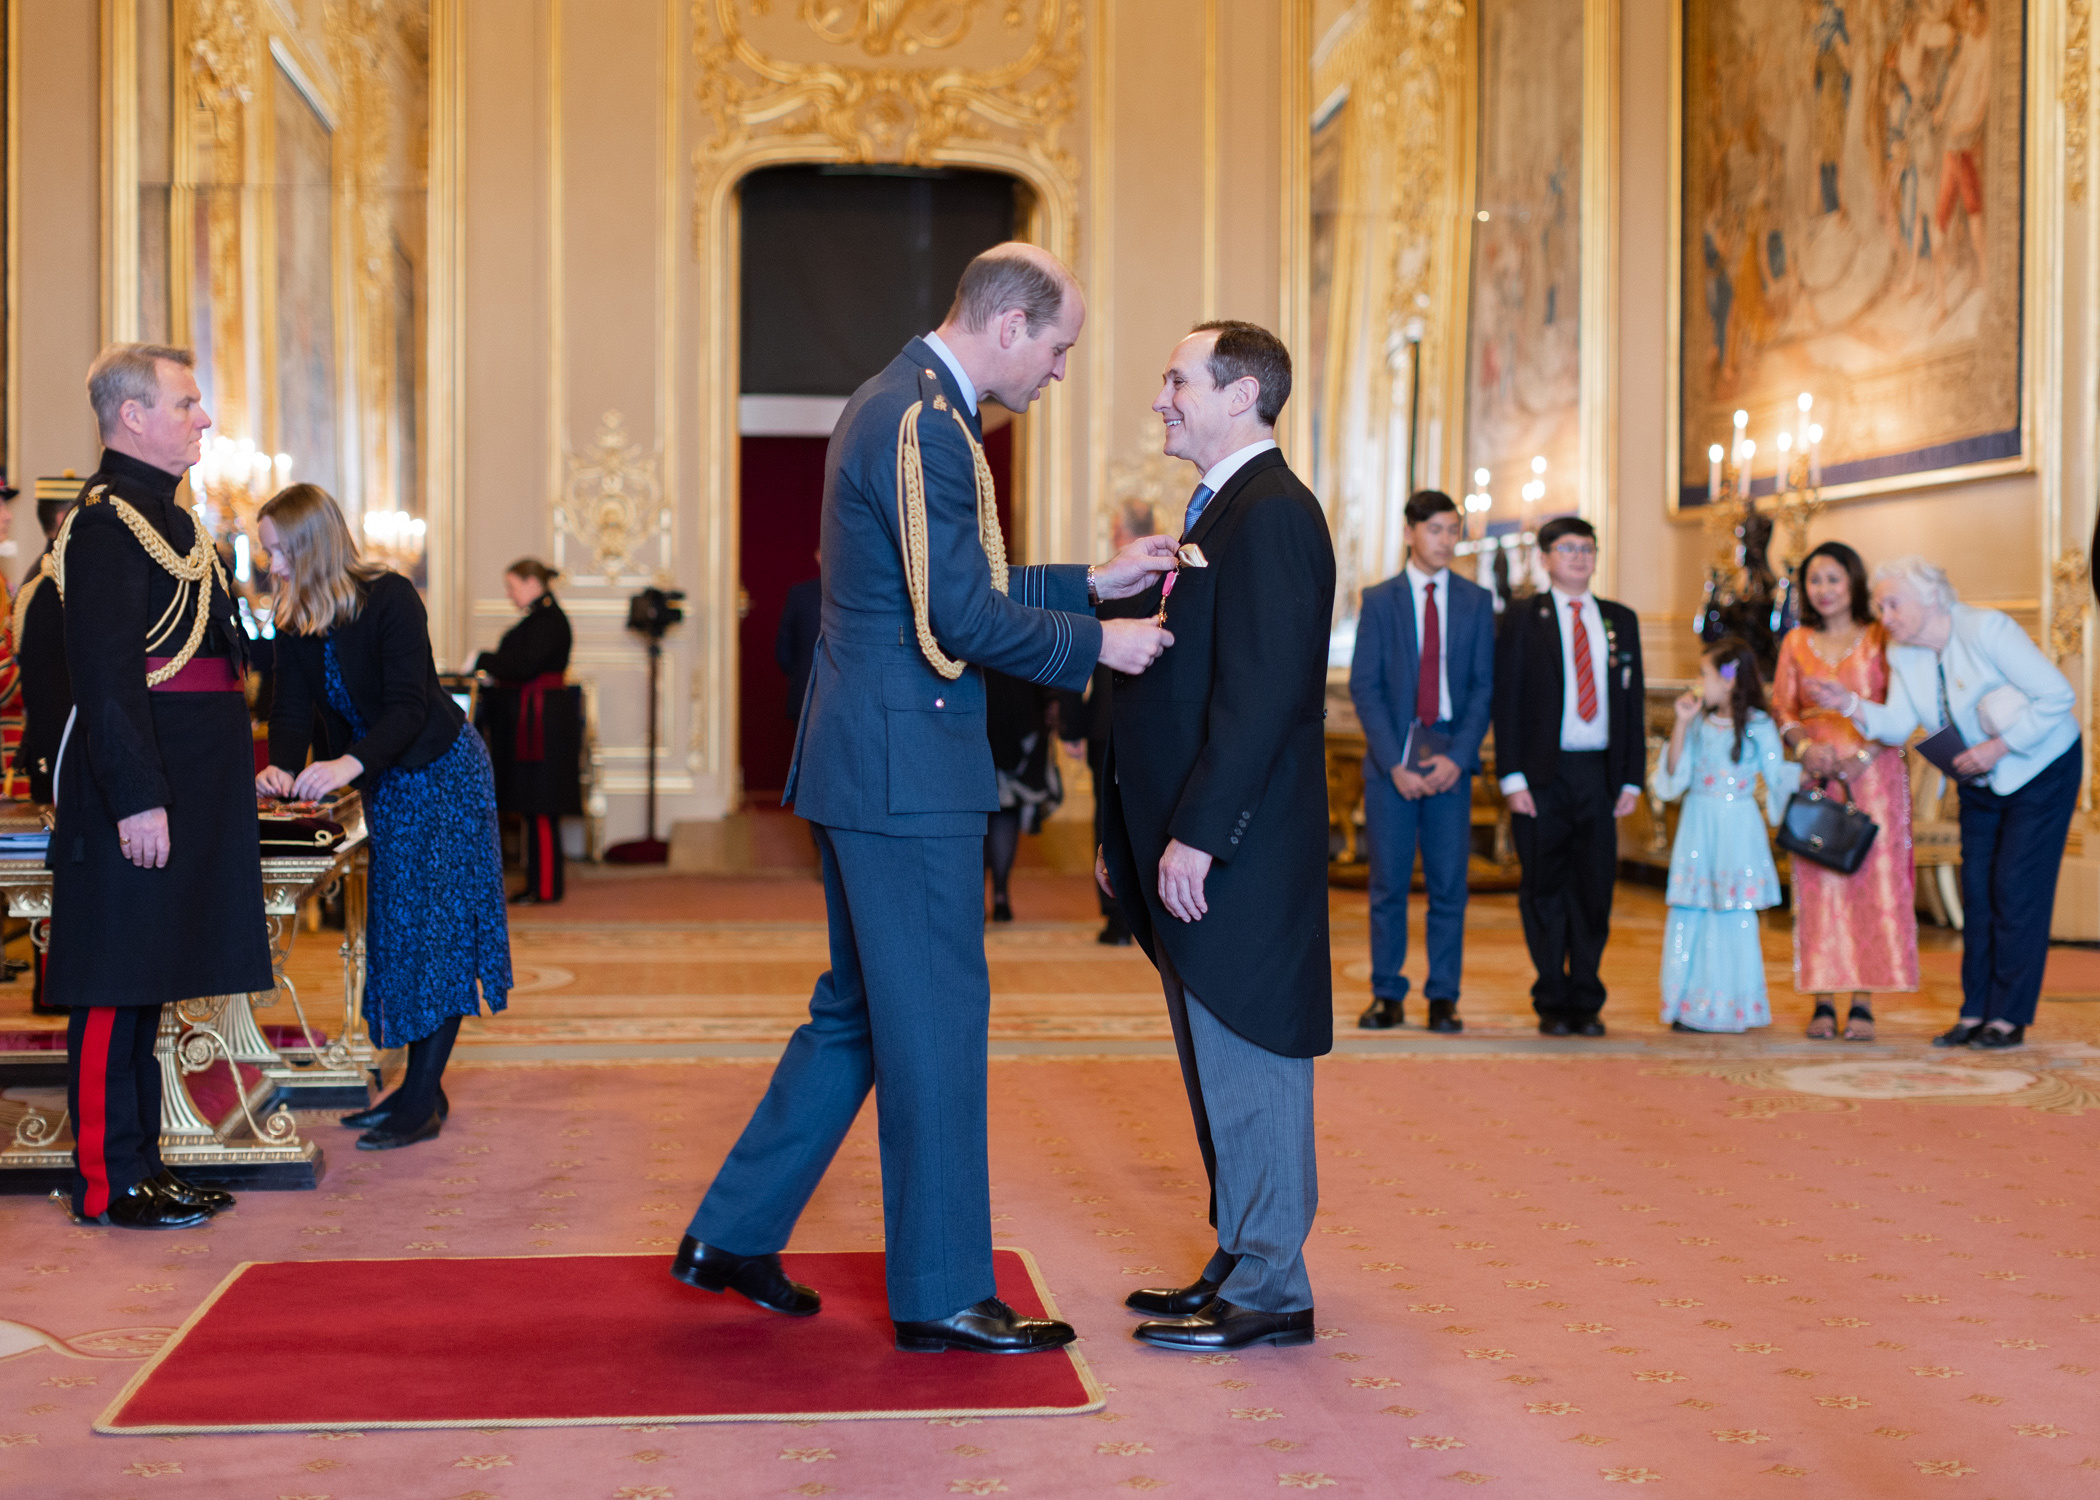 Chairman receives OBE for work in Nepal